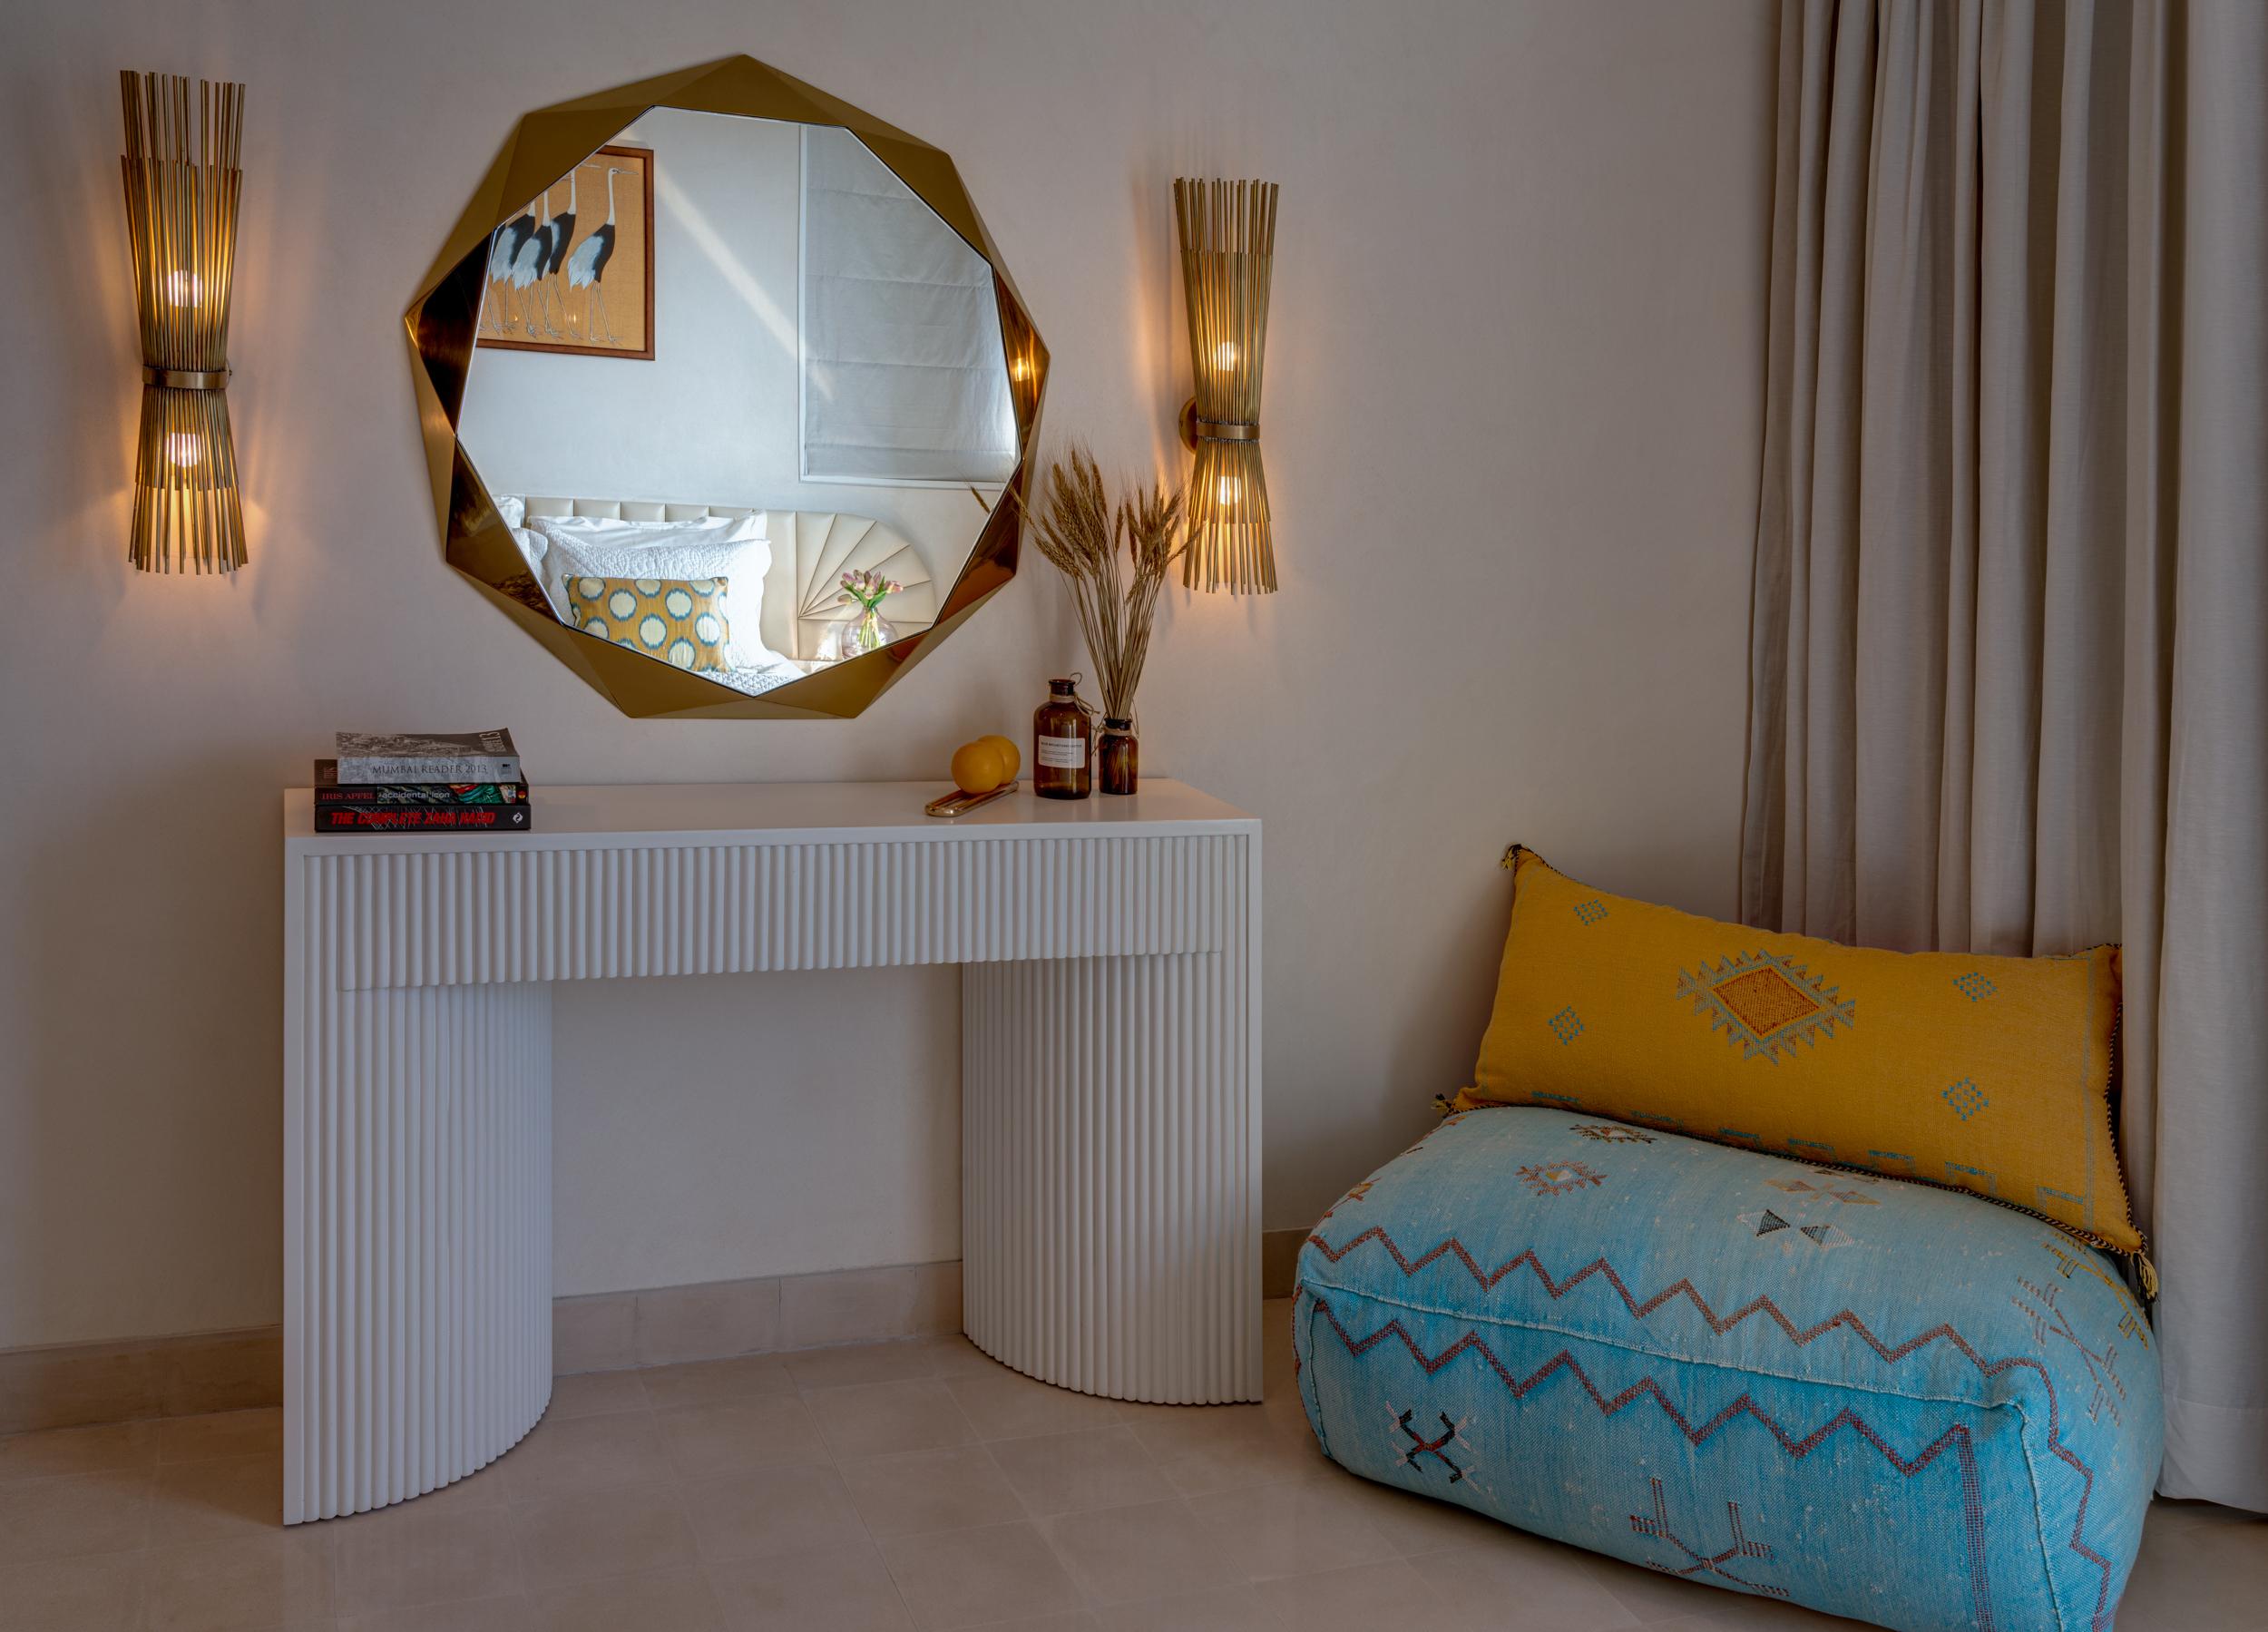 Stella Small Wall Console Mirror Gold by Nika Zupanc is a gorgeous mirror with starry edges in rose gold or gold. A statement piece in any interior space.

Nika Zupanc, a strikingly renowned Slovenian designer, never shies away from redefining the